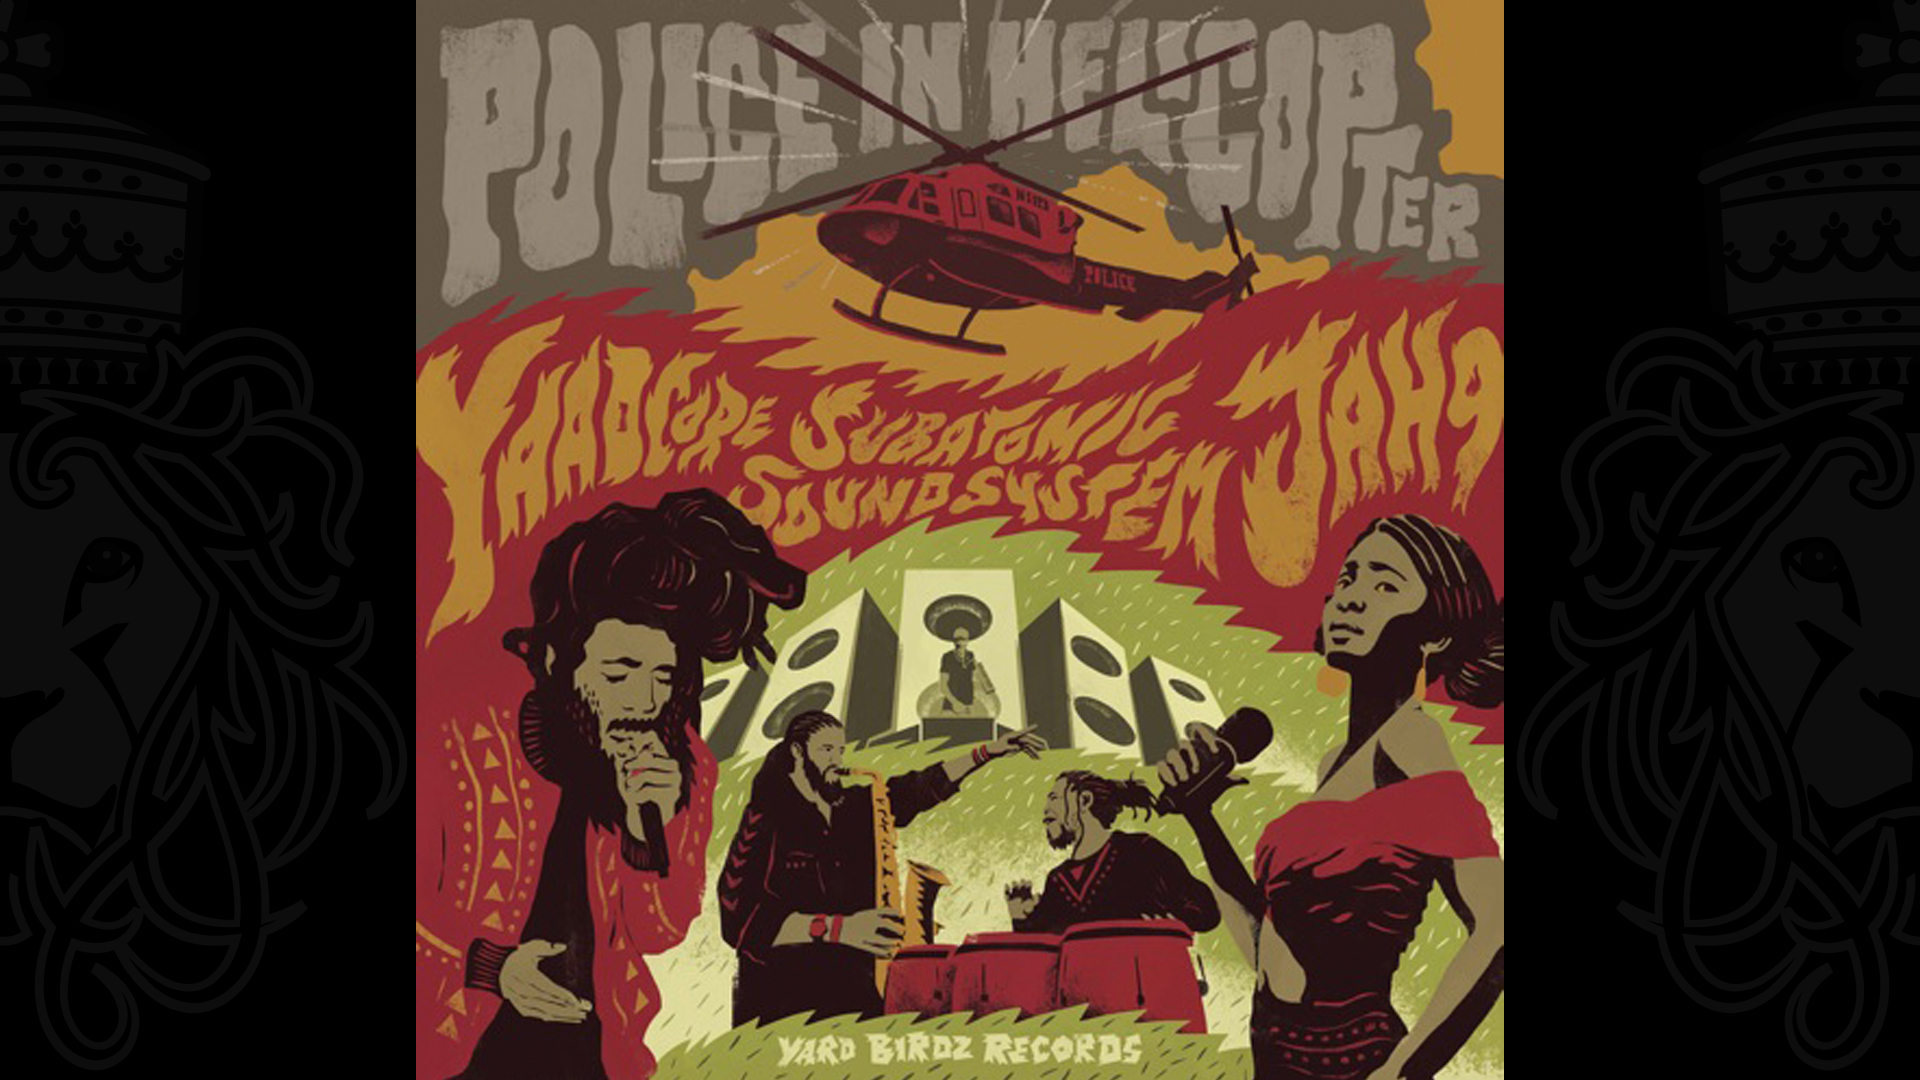 Yaadcore, Jah9 & Subatomic Sound System - Police in Helicopte